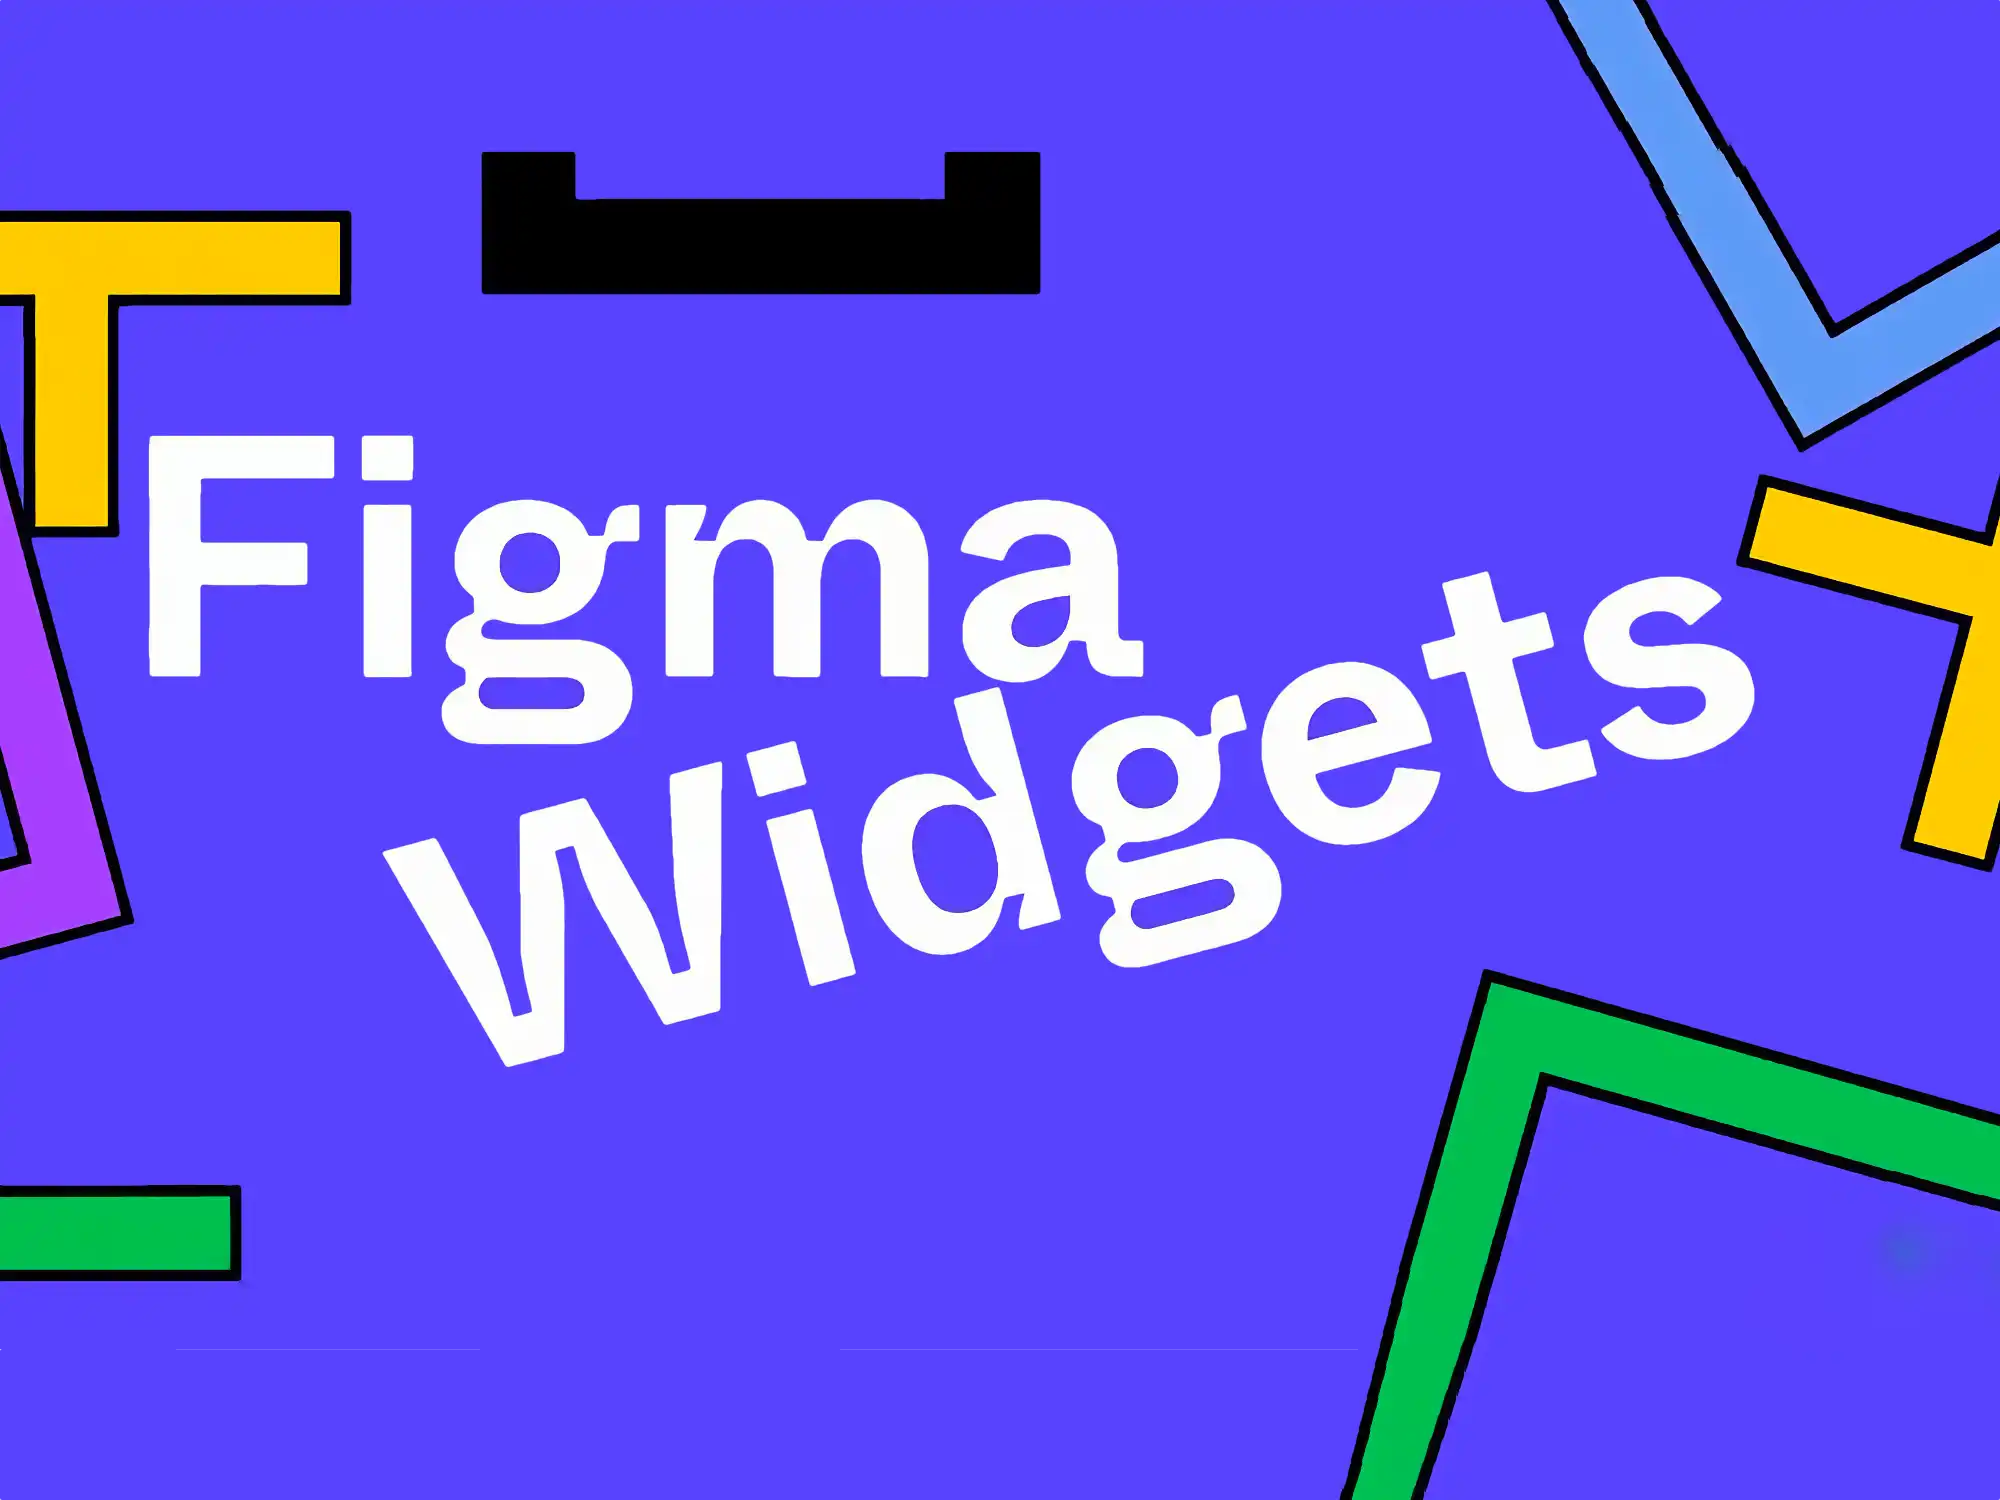 How to work with widgets in Figma